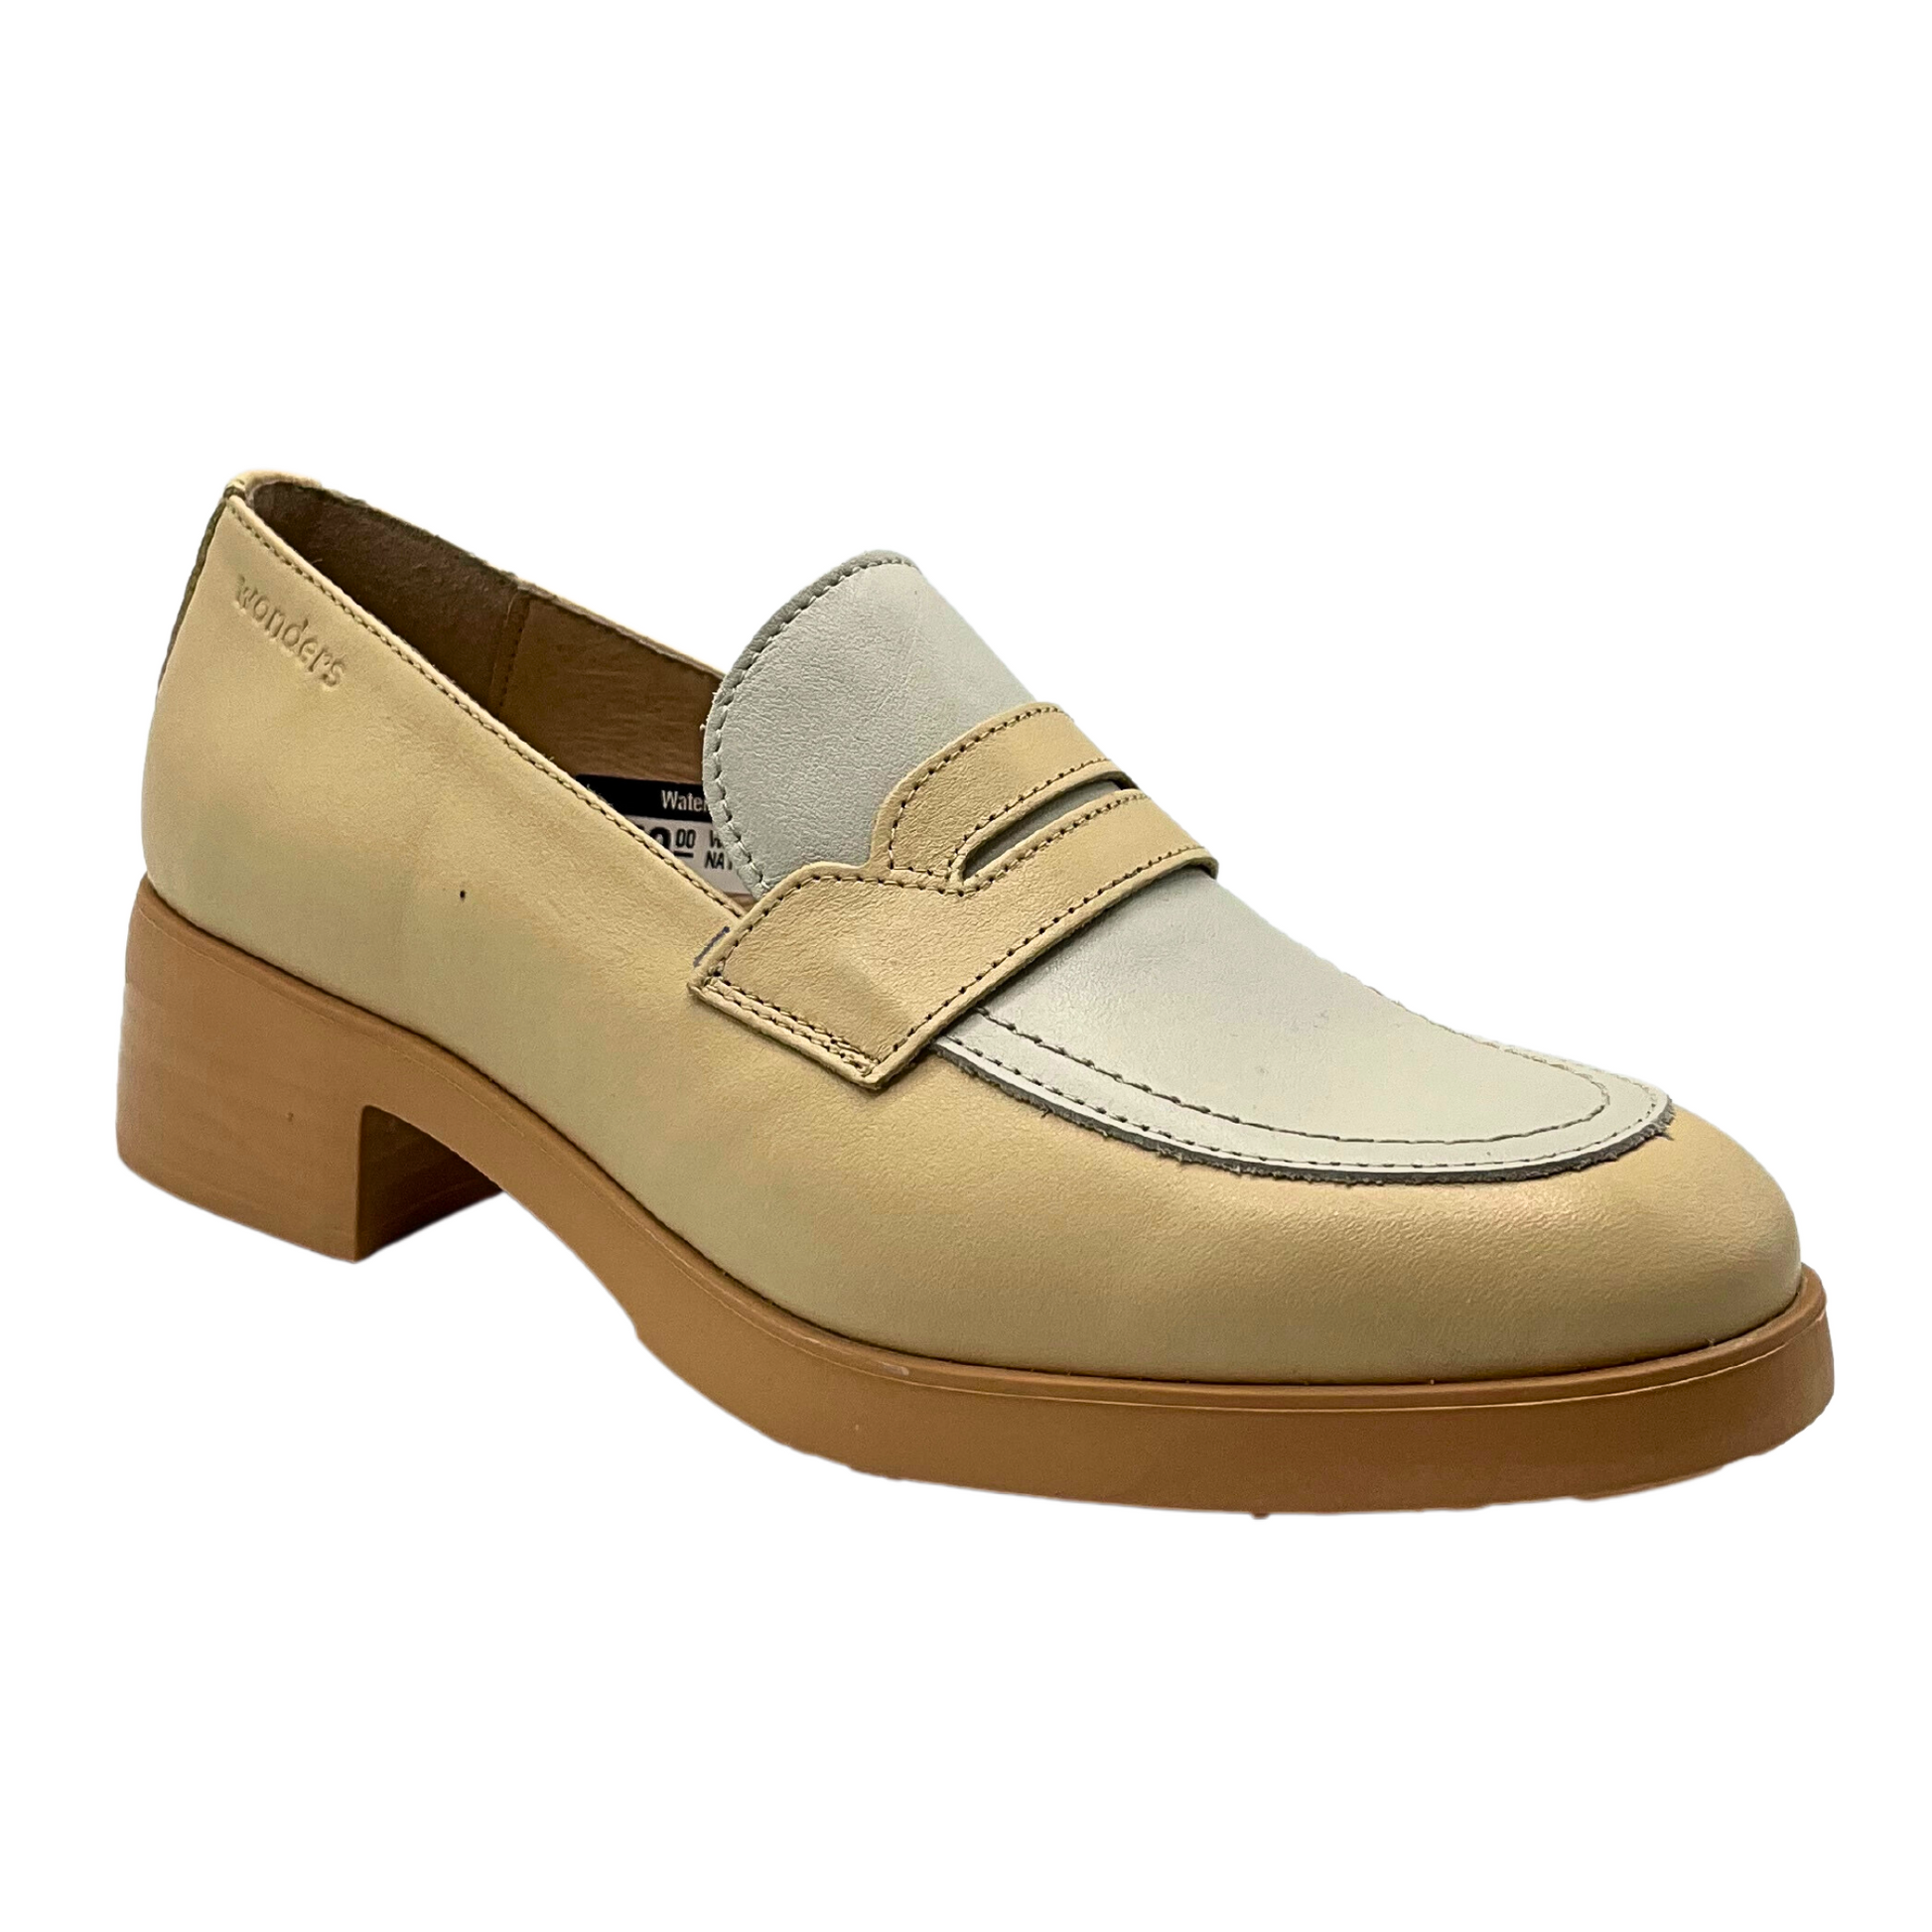 Angled front view of a slip on loafer from Wonders